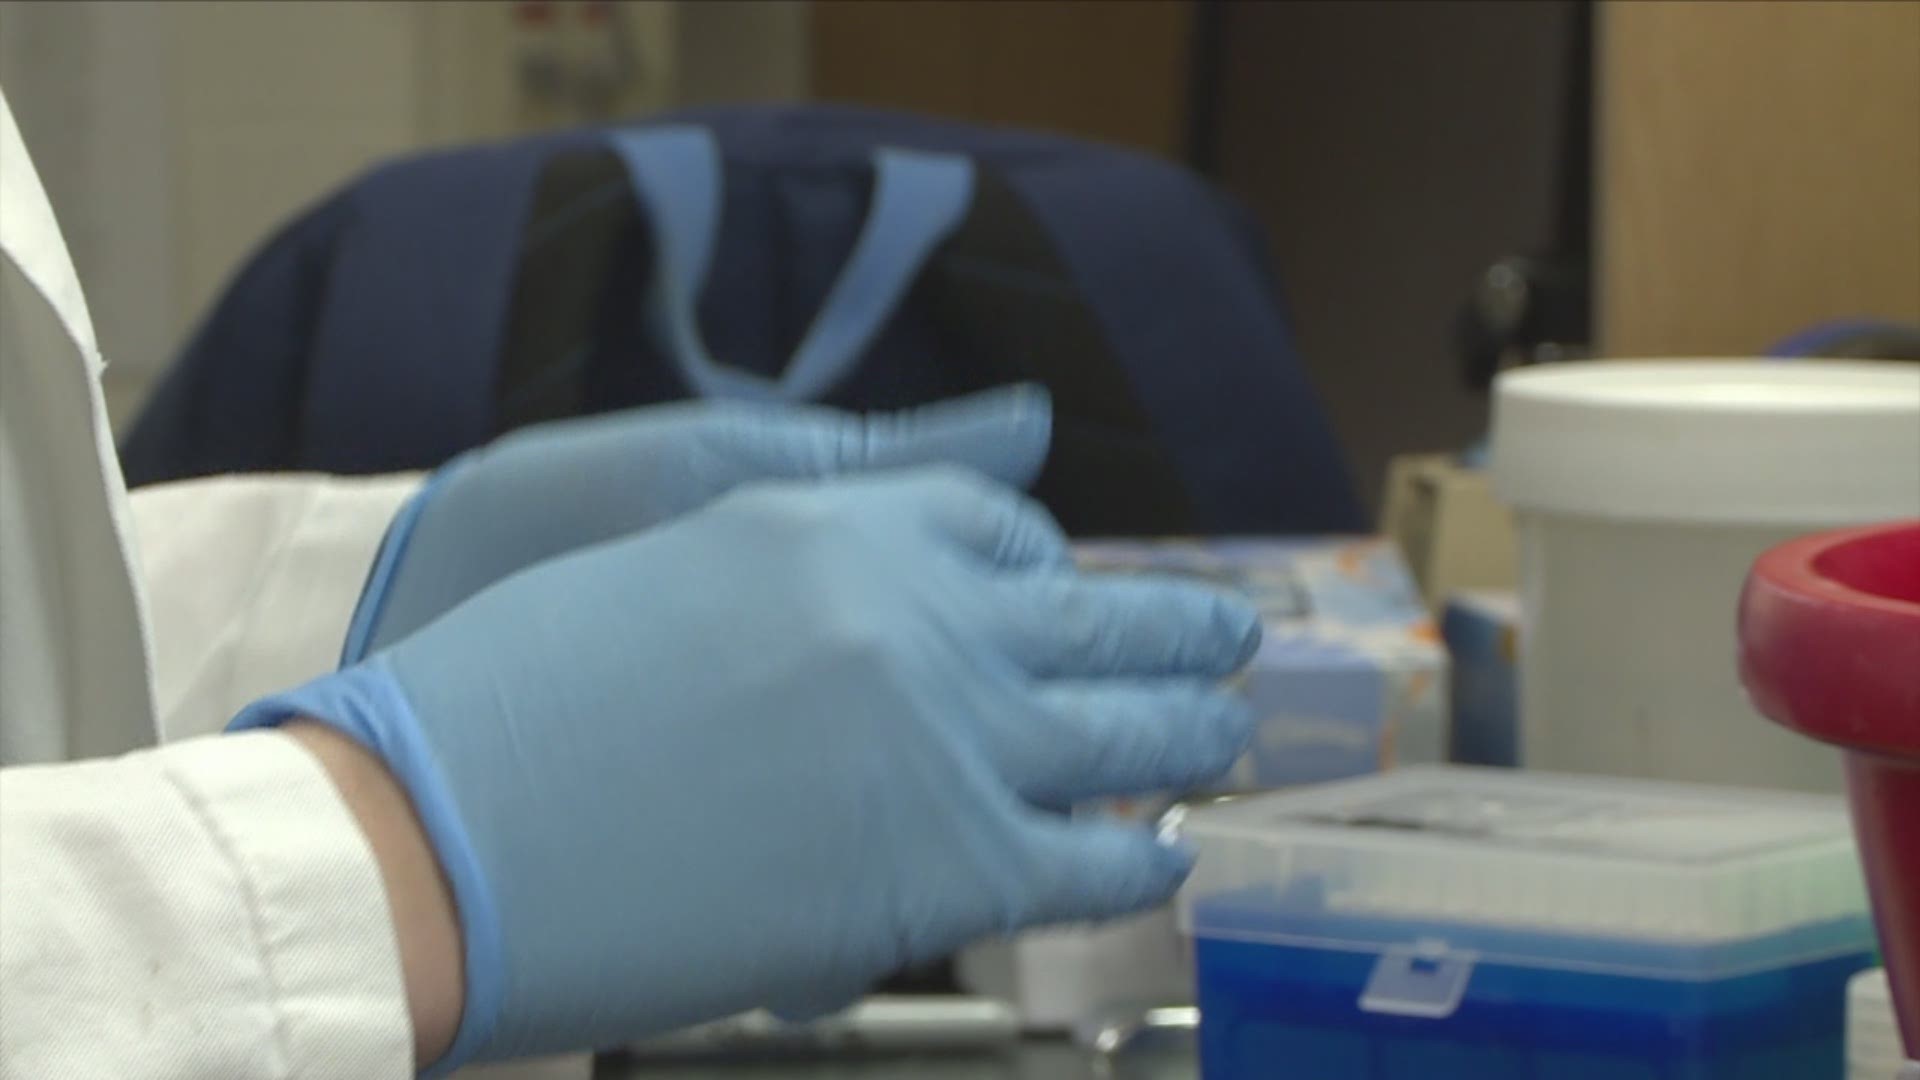 Health officials say they're ready to respond if the coronavirus outbreak reaches the Quad Cities.